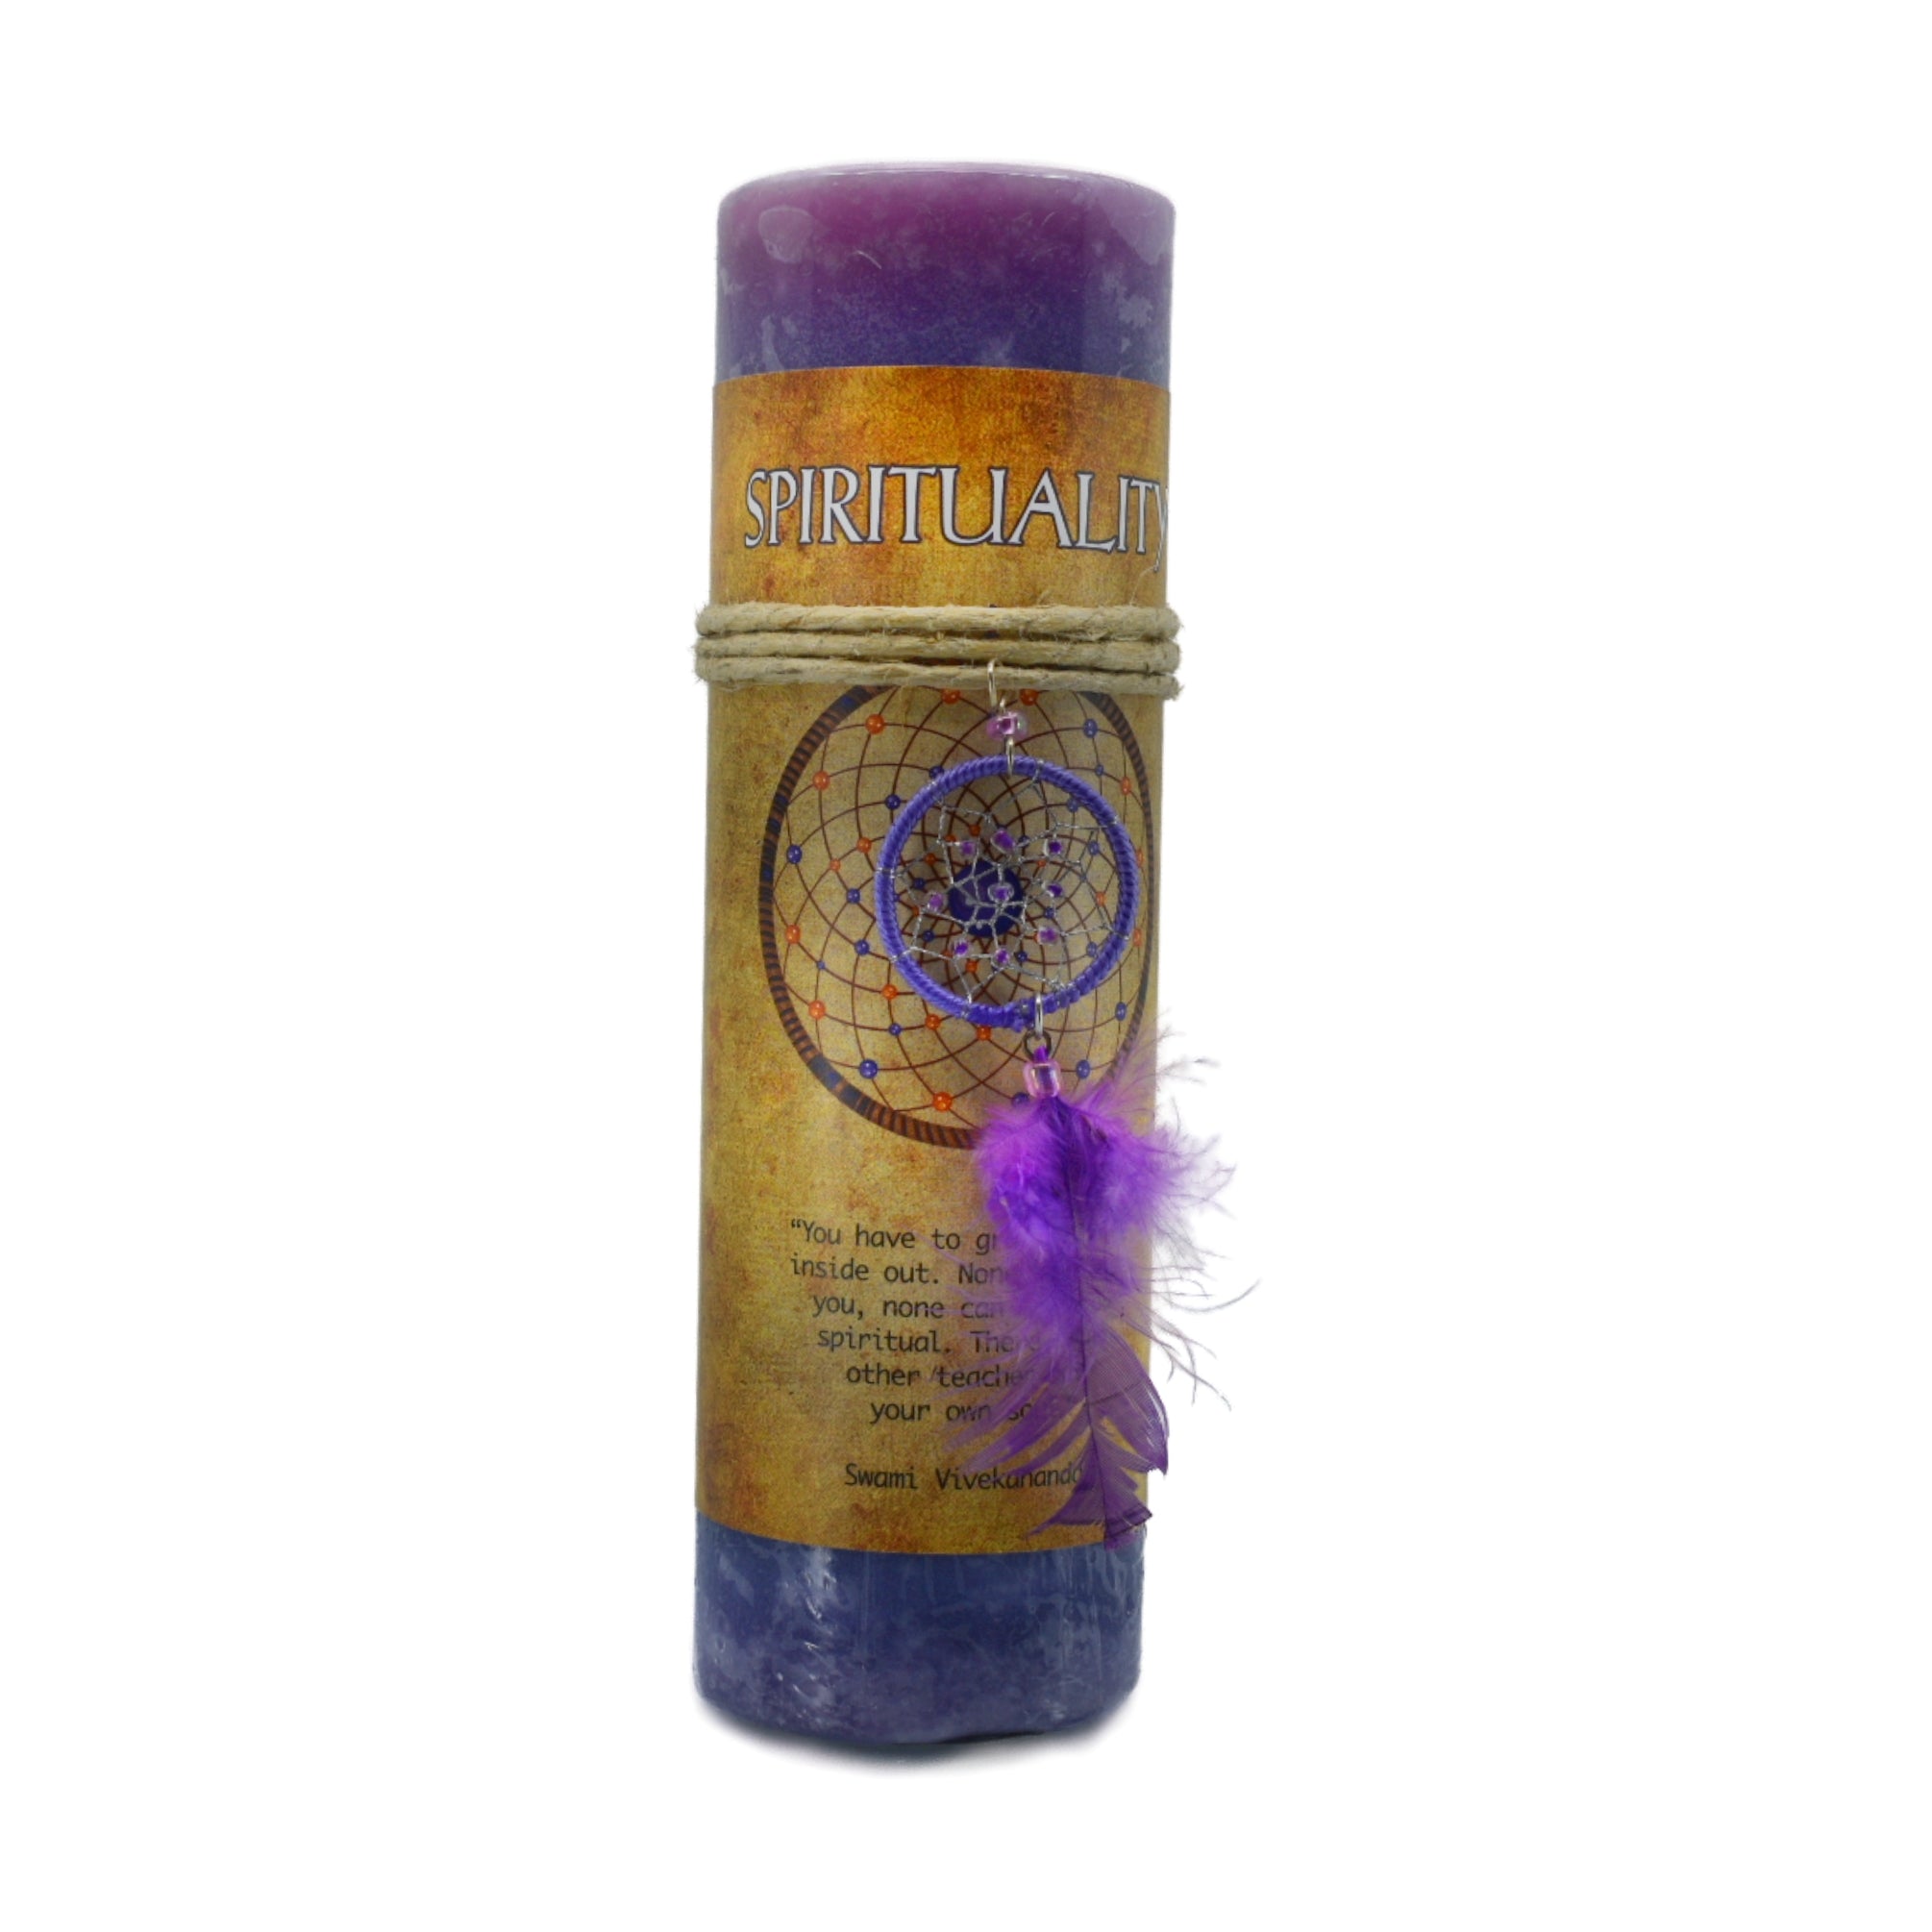 Spirituality Dream Catcher Candle.  This lite purple candle has a purple dream catcher and purple feather that can be worn as a necklace or used as an amulet.  Use this candle to help you through your journey to search your soul for your spirituality.